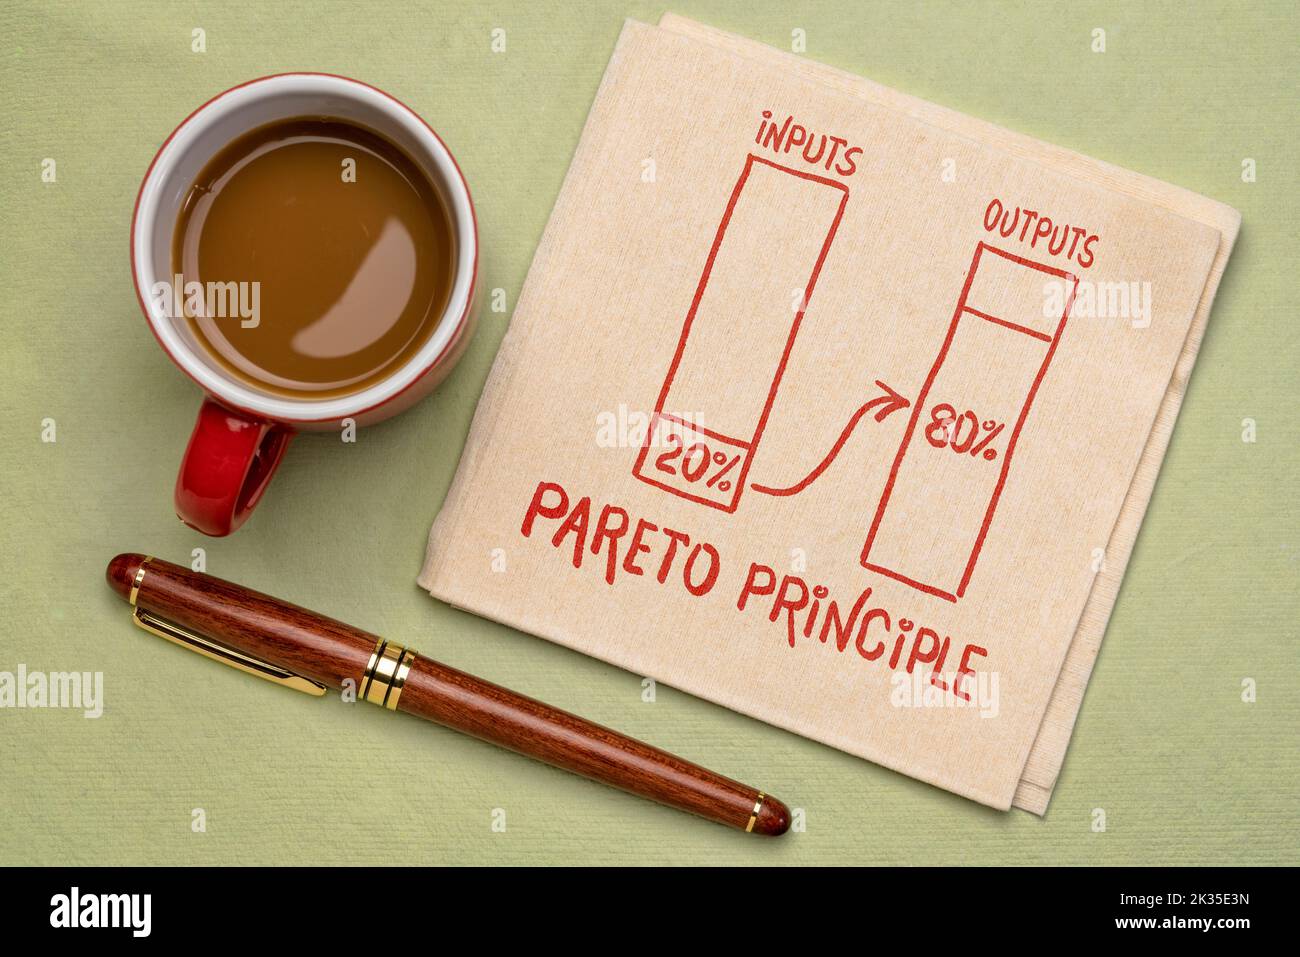 Pareto 80-20 principle concept - a sketch on a napkin with a cup of coffee, priorities and productivity concept Stock Photo